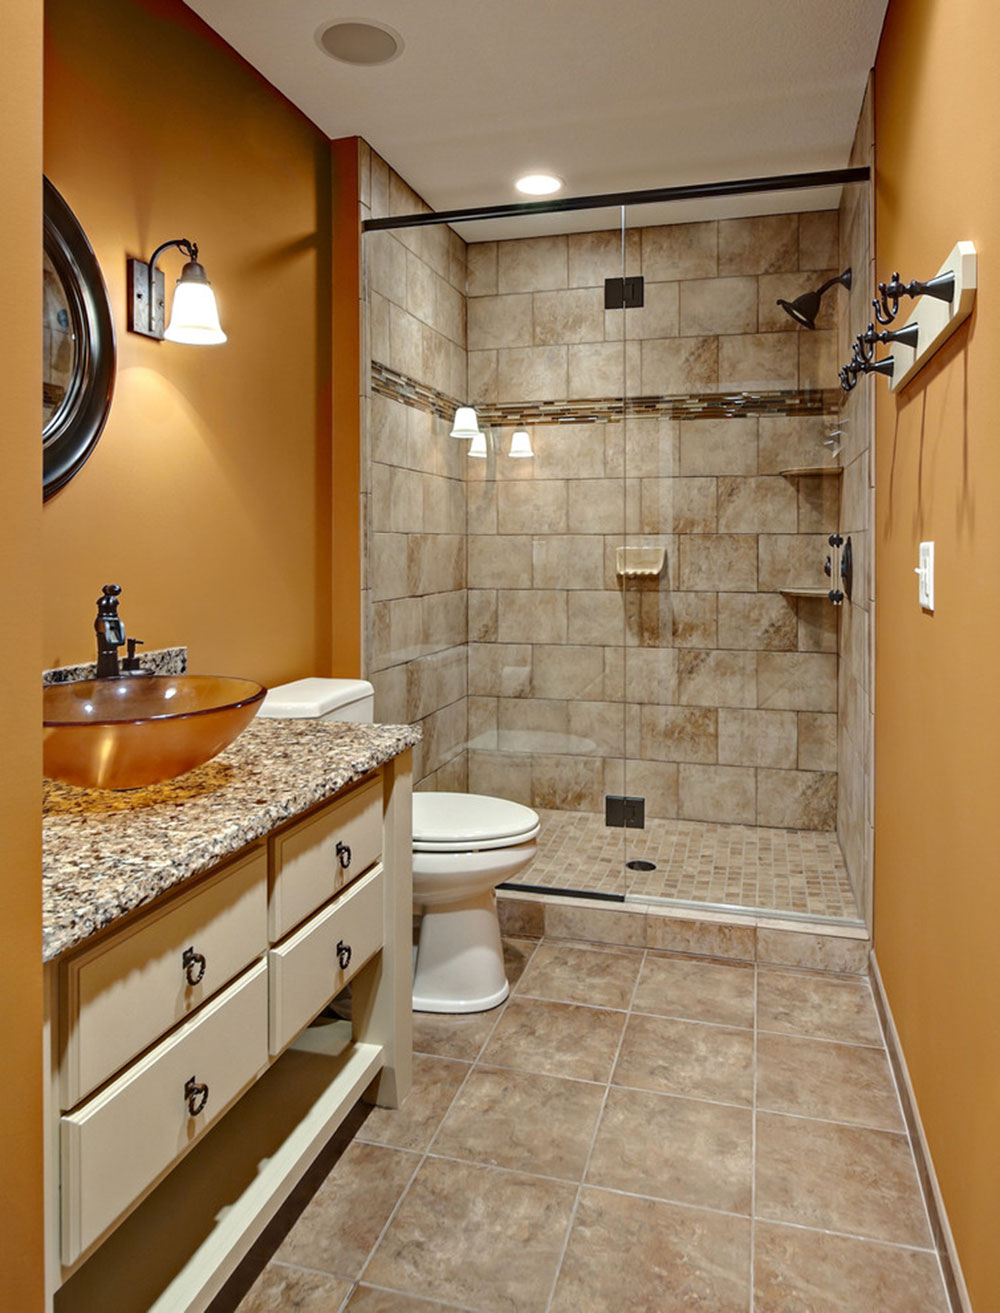 Cost To Add A Bathroom In The Basement, How Much Does It Cost To Put A Small Bathroom In Basement